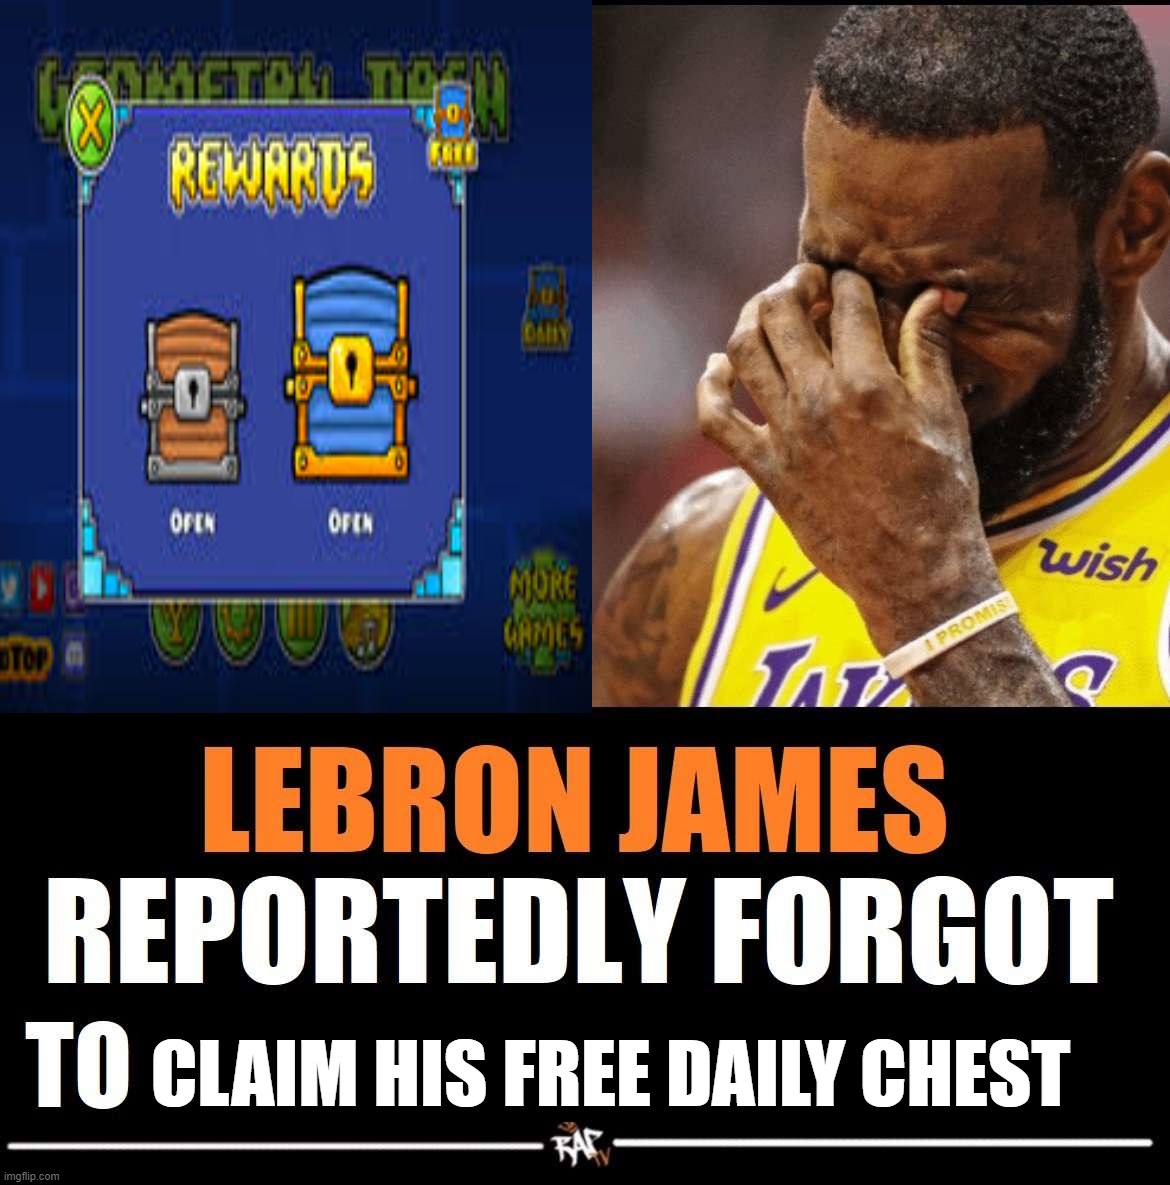 how is he gonna get his free shards now? | CLAIM HIS FREE DAILY CHEST | image tagged in lebron james reportedly forgot to | made w/ Imgflip meme maker